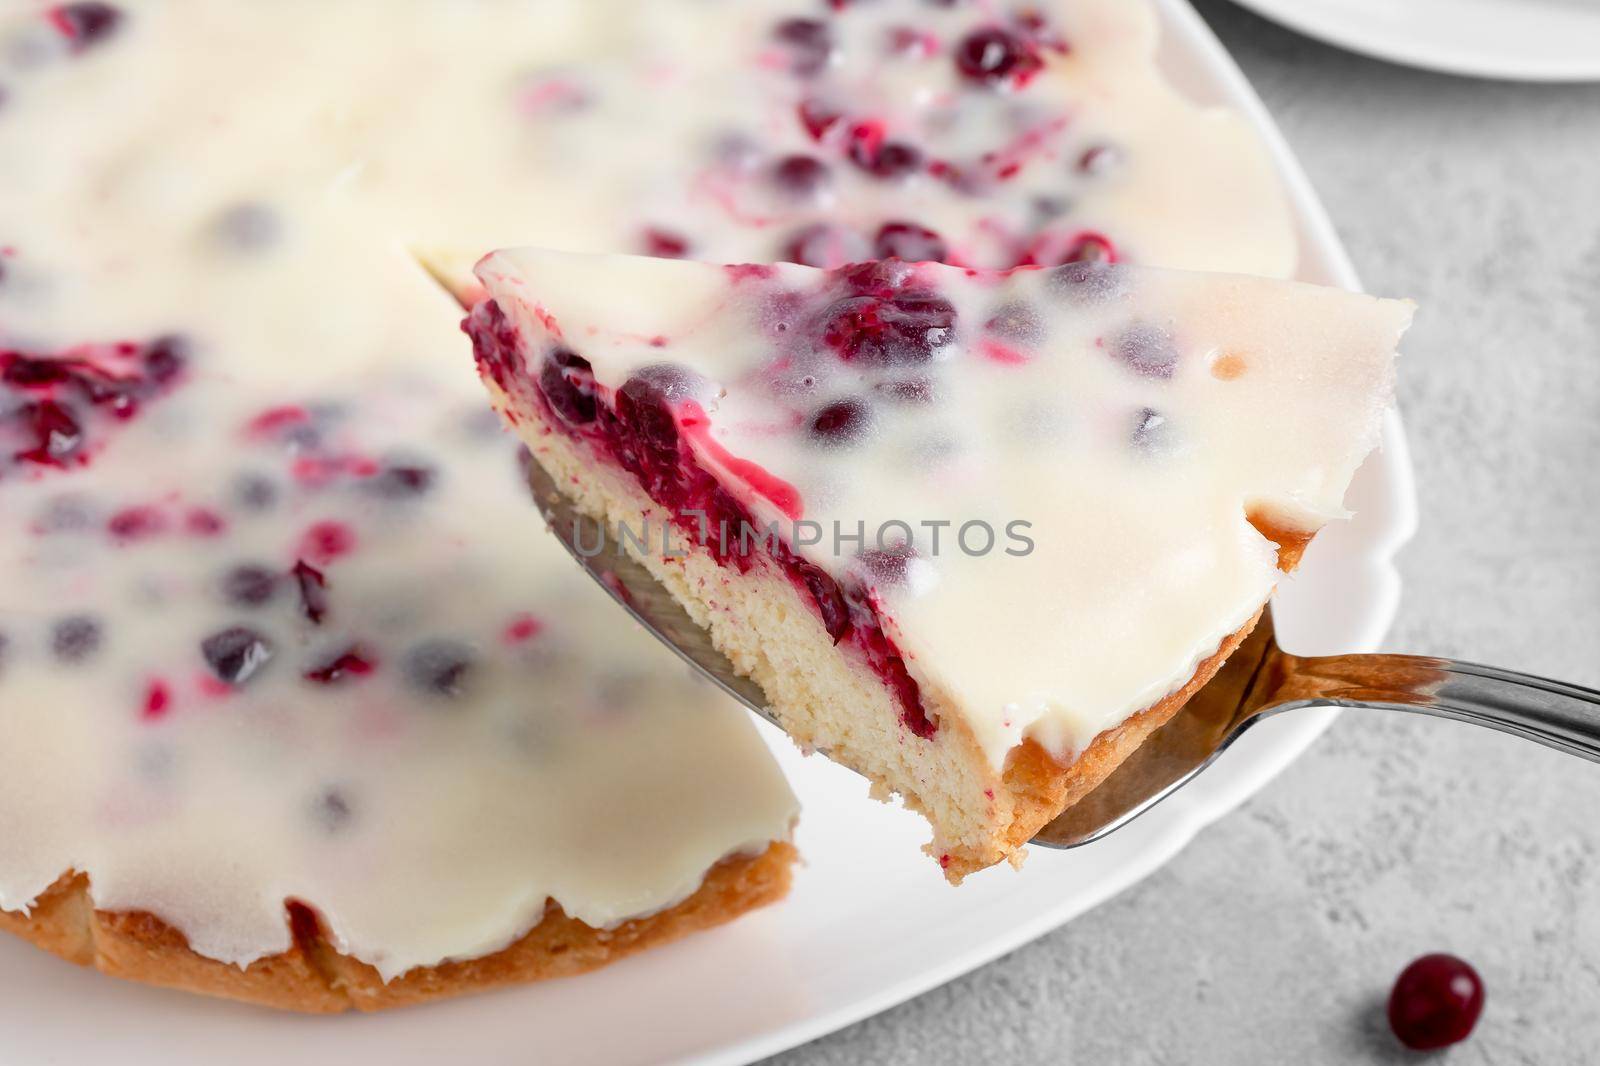 Homemade cake with cranberries and sour cream. Piece of pie close up.